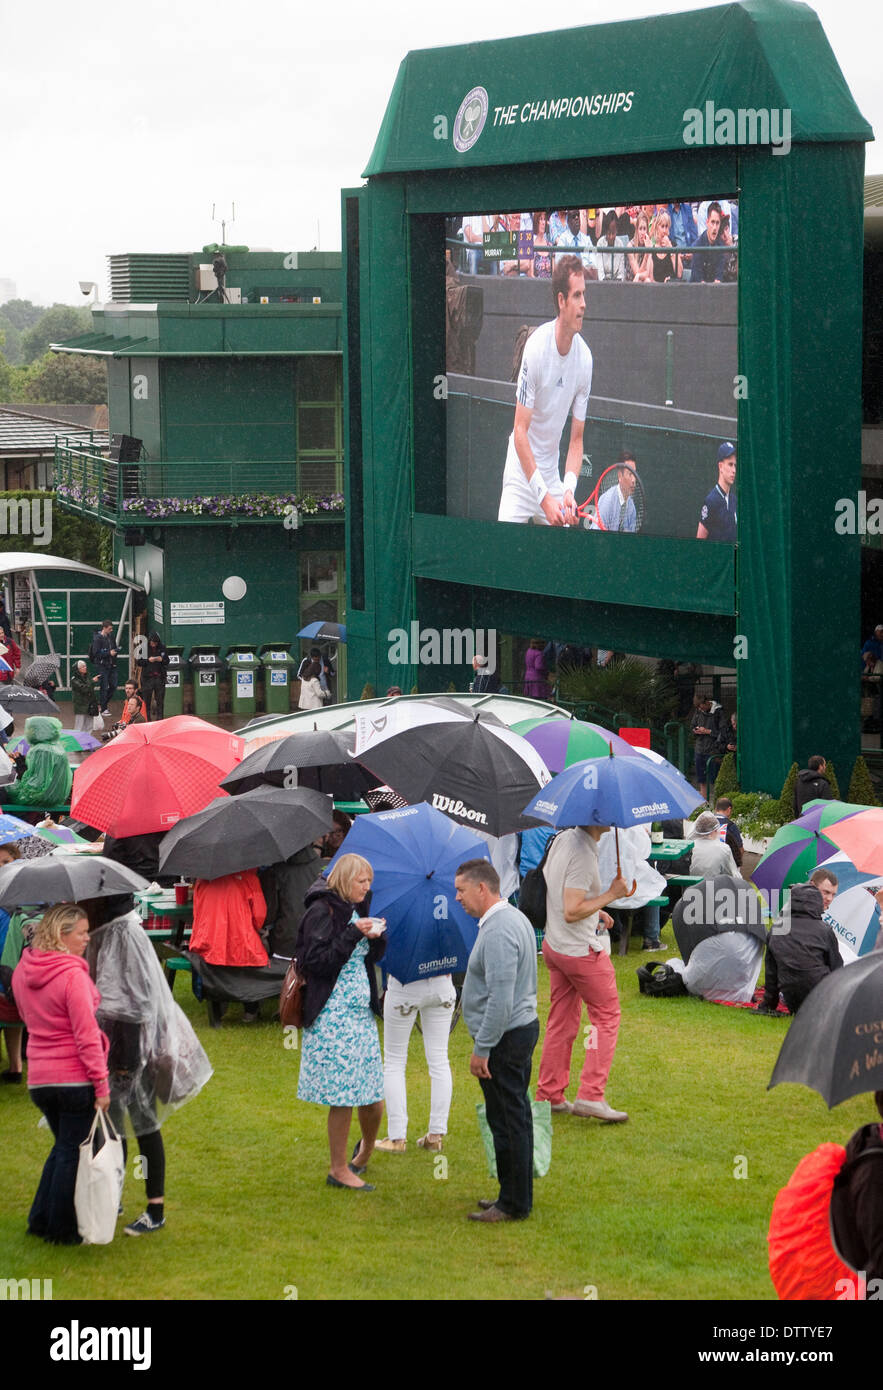 Wimbledon tennis crowd on Murray mount in background a TV screen showing Andy Murray foreground open Wimbledon umbrella Stock Photo